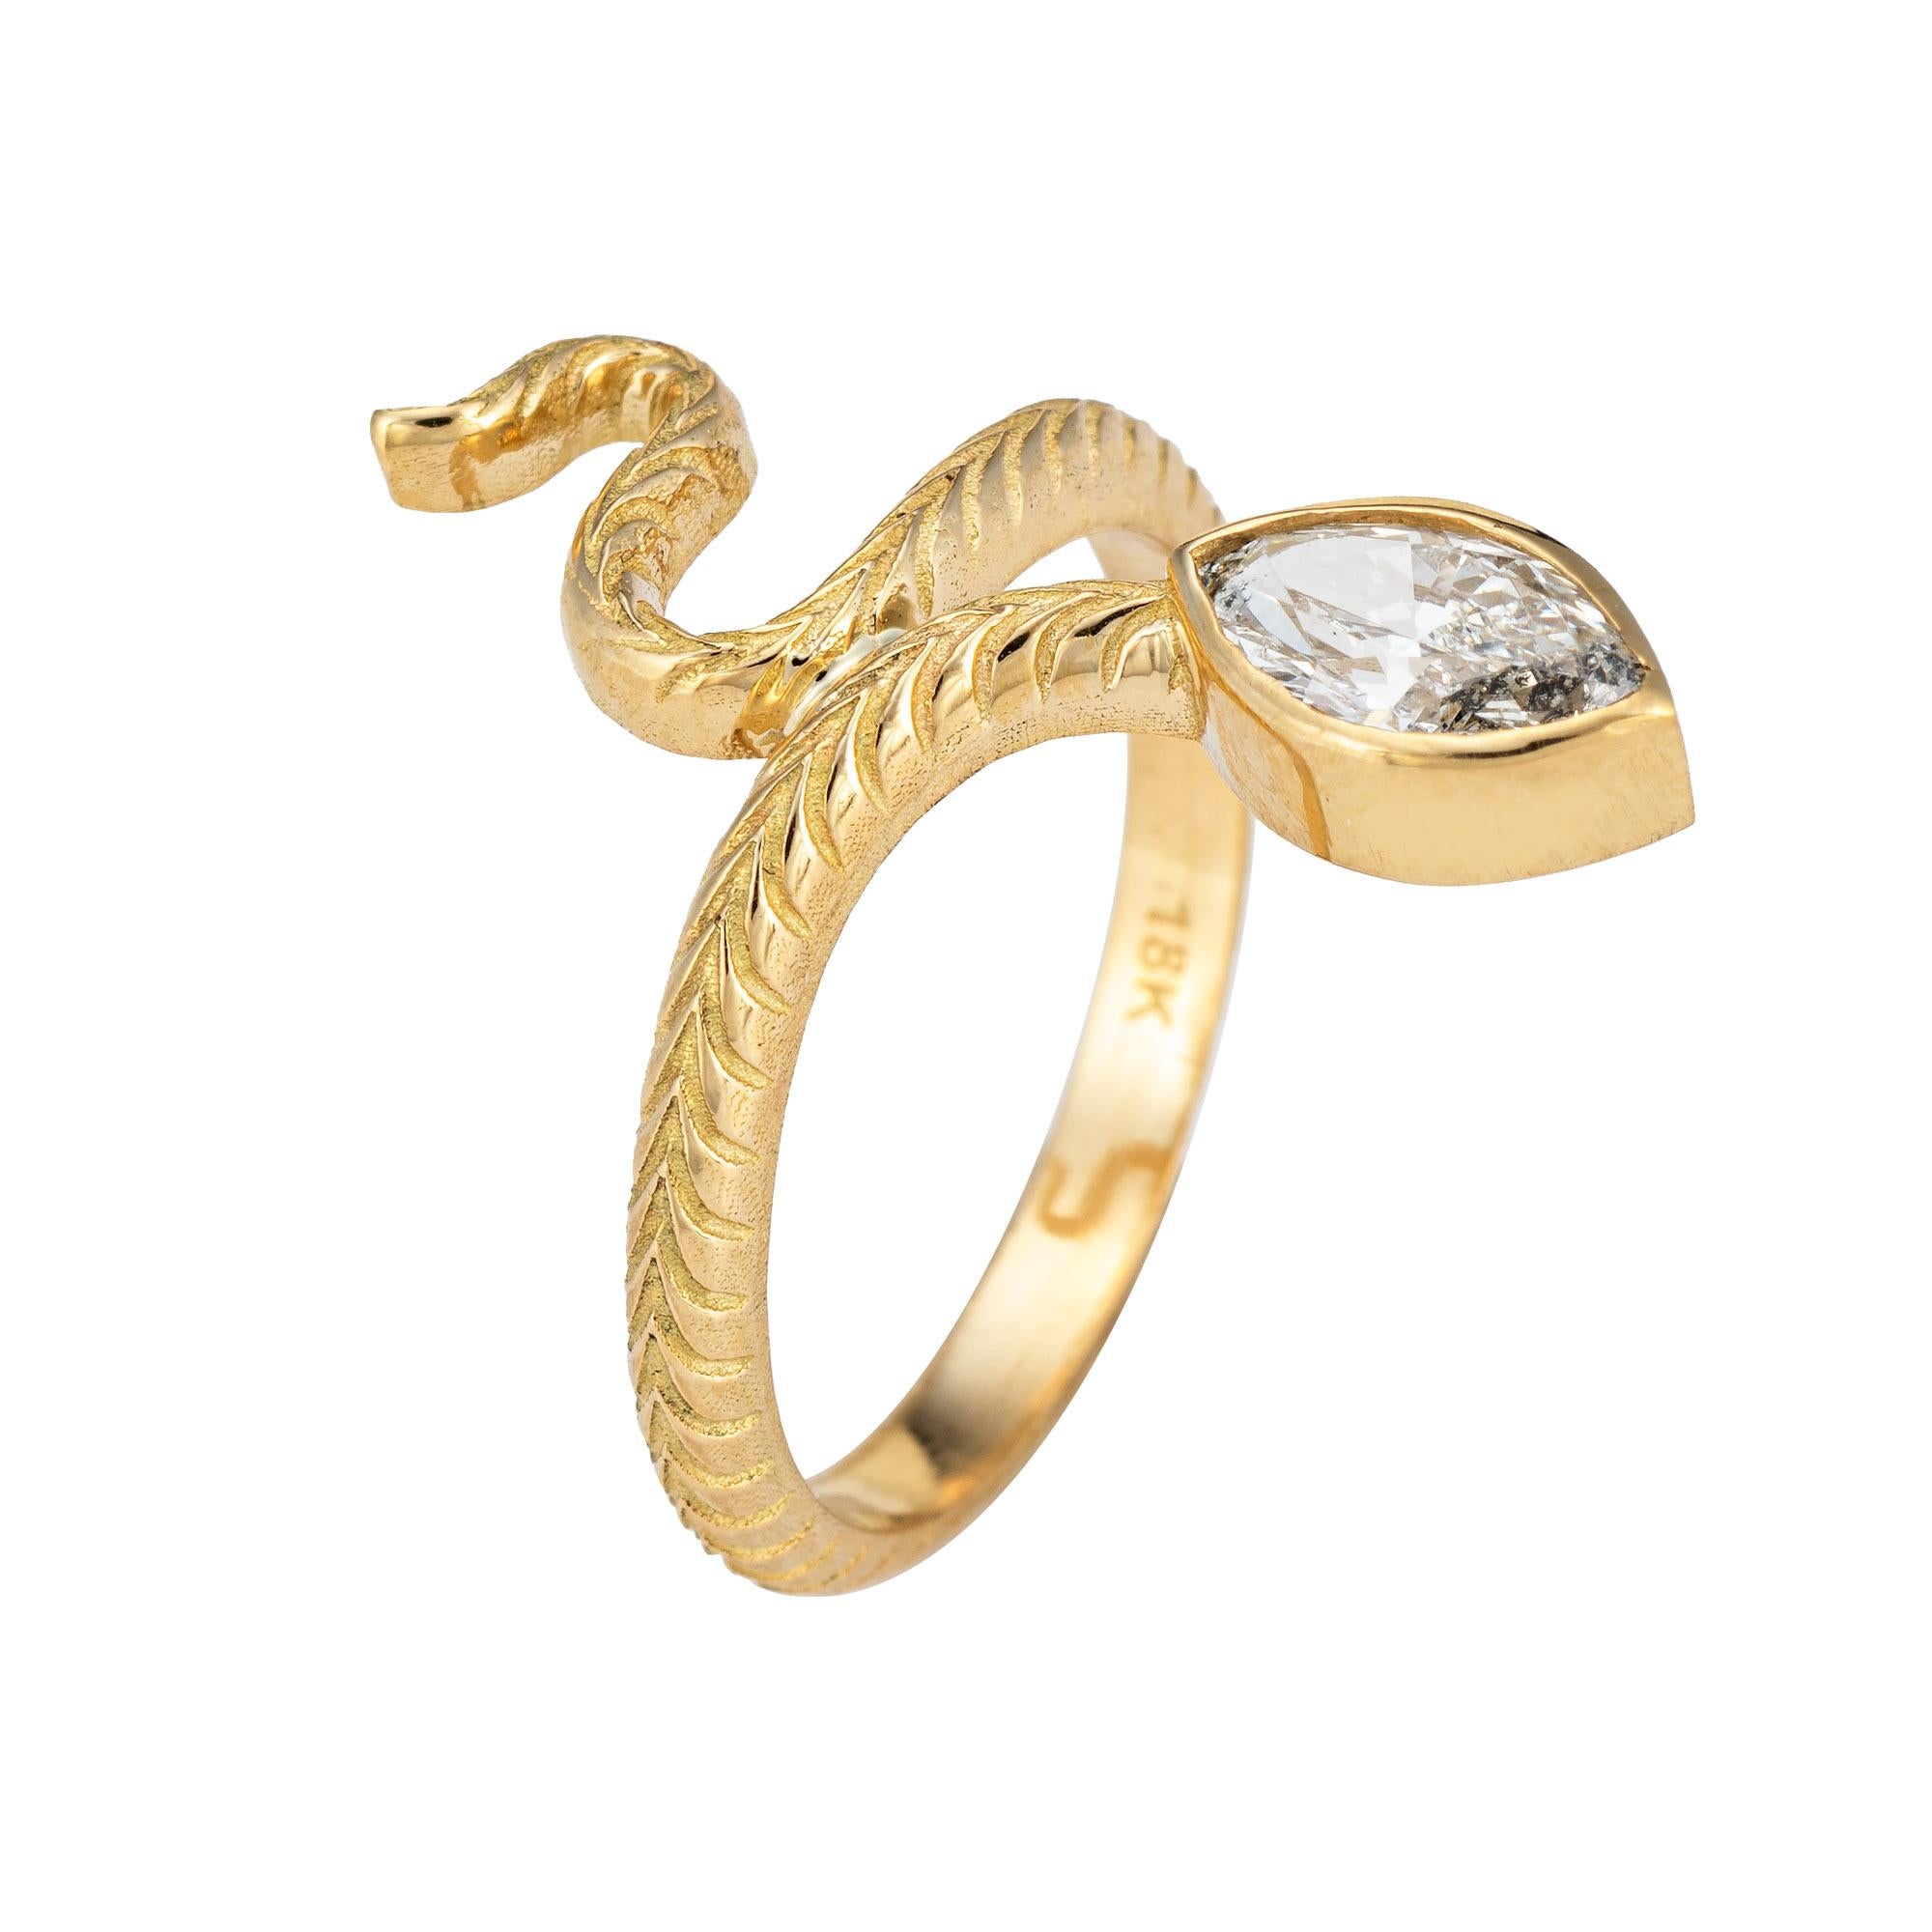 Stylish diamond snake ring crafted in 18 karat yellow gold. 

Marquise brilliant diamond measures 7.98 x 4.42 x 2.93 and weighs 0.63 carats. The diamond is graded J color and I1 clarity. Also included is a GIA report/certificate.    

For centuries